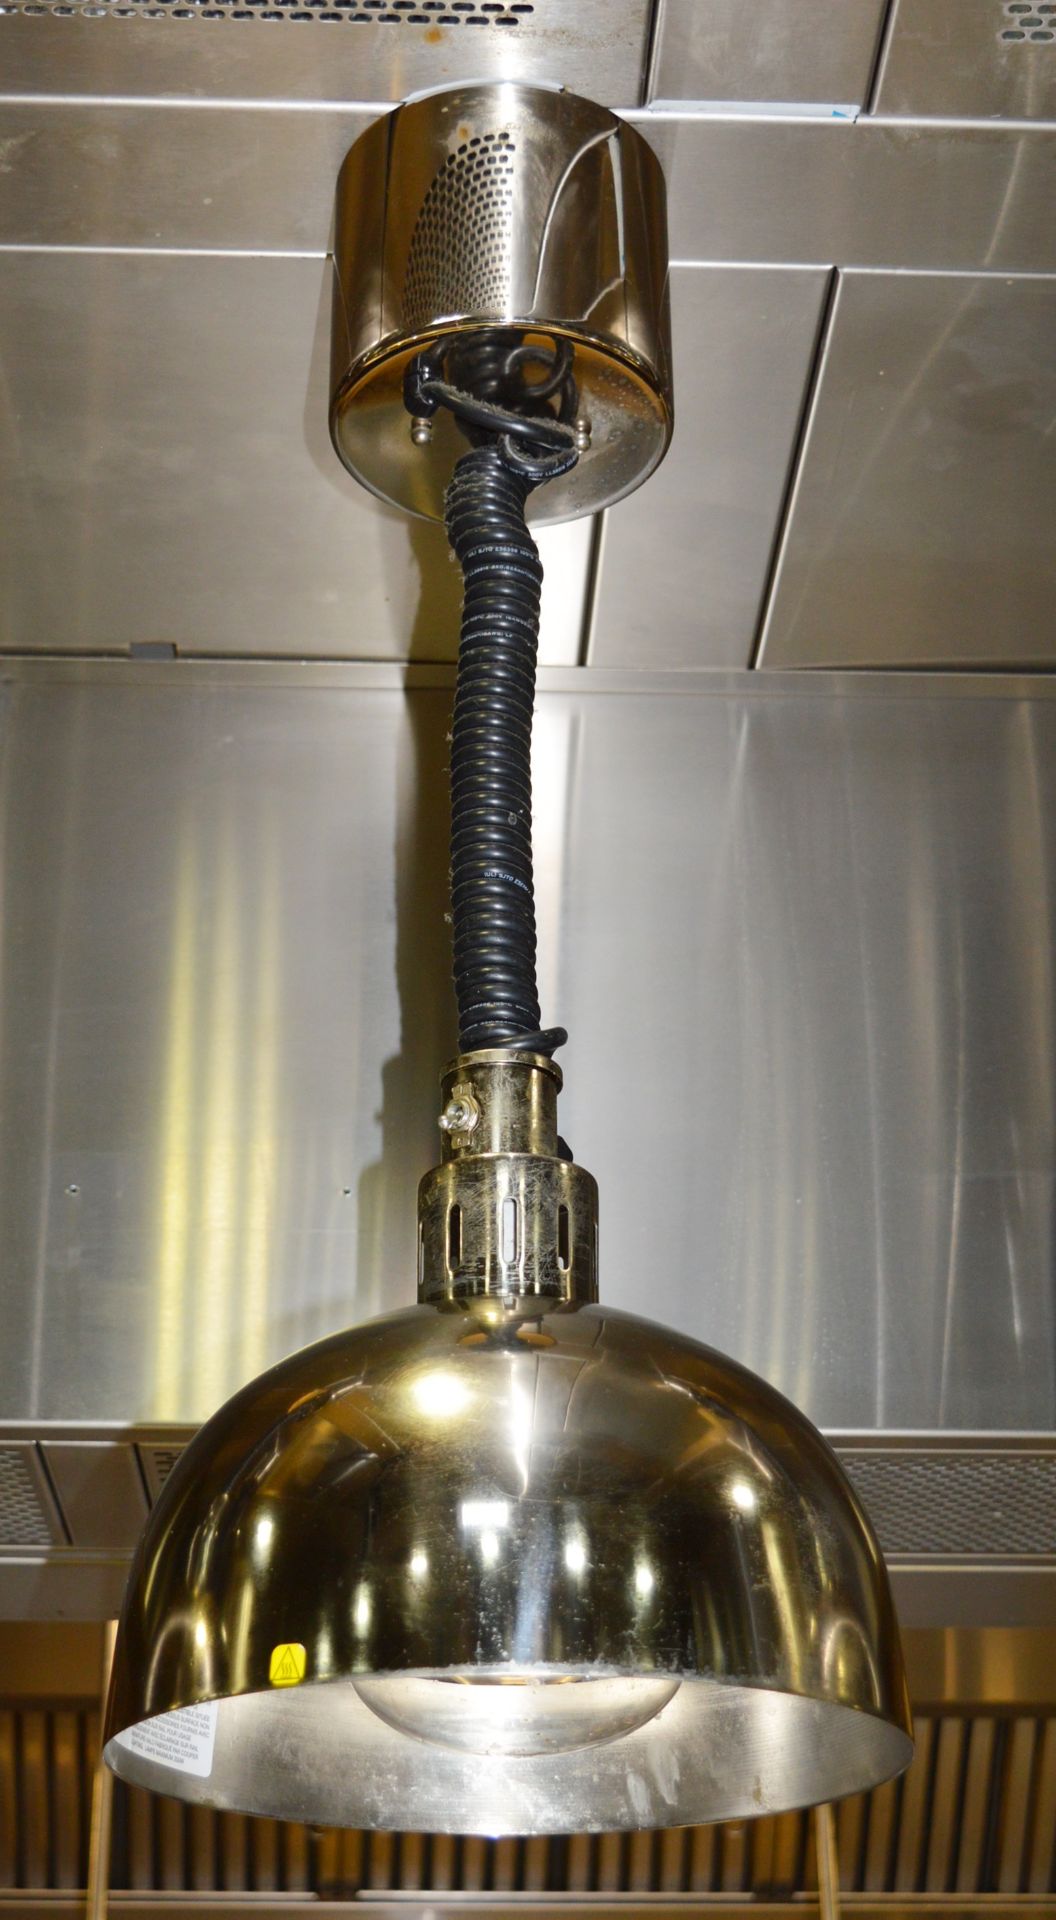 4 x Hatco DL-750-RL Hanging Retractable Heat Lamps in Bright Chrome - Keeps Food Warm at Kitchen - Image 5 of 7